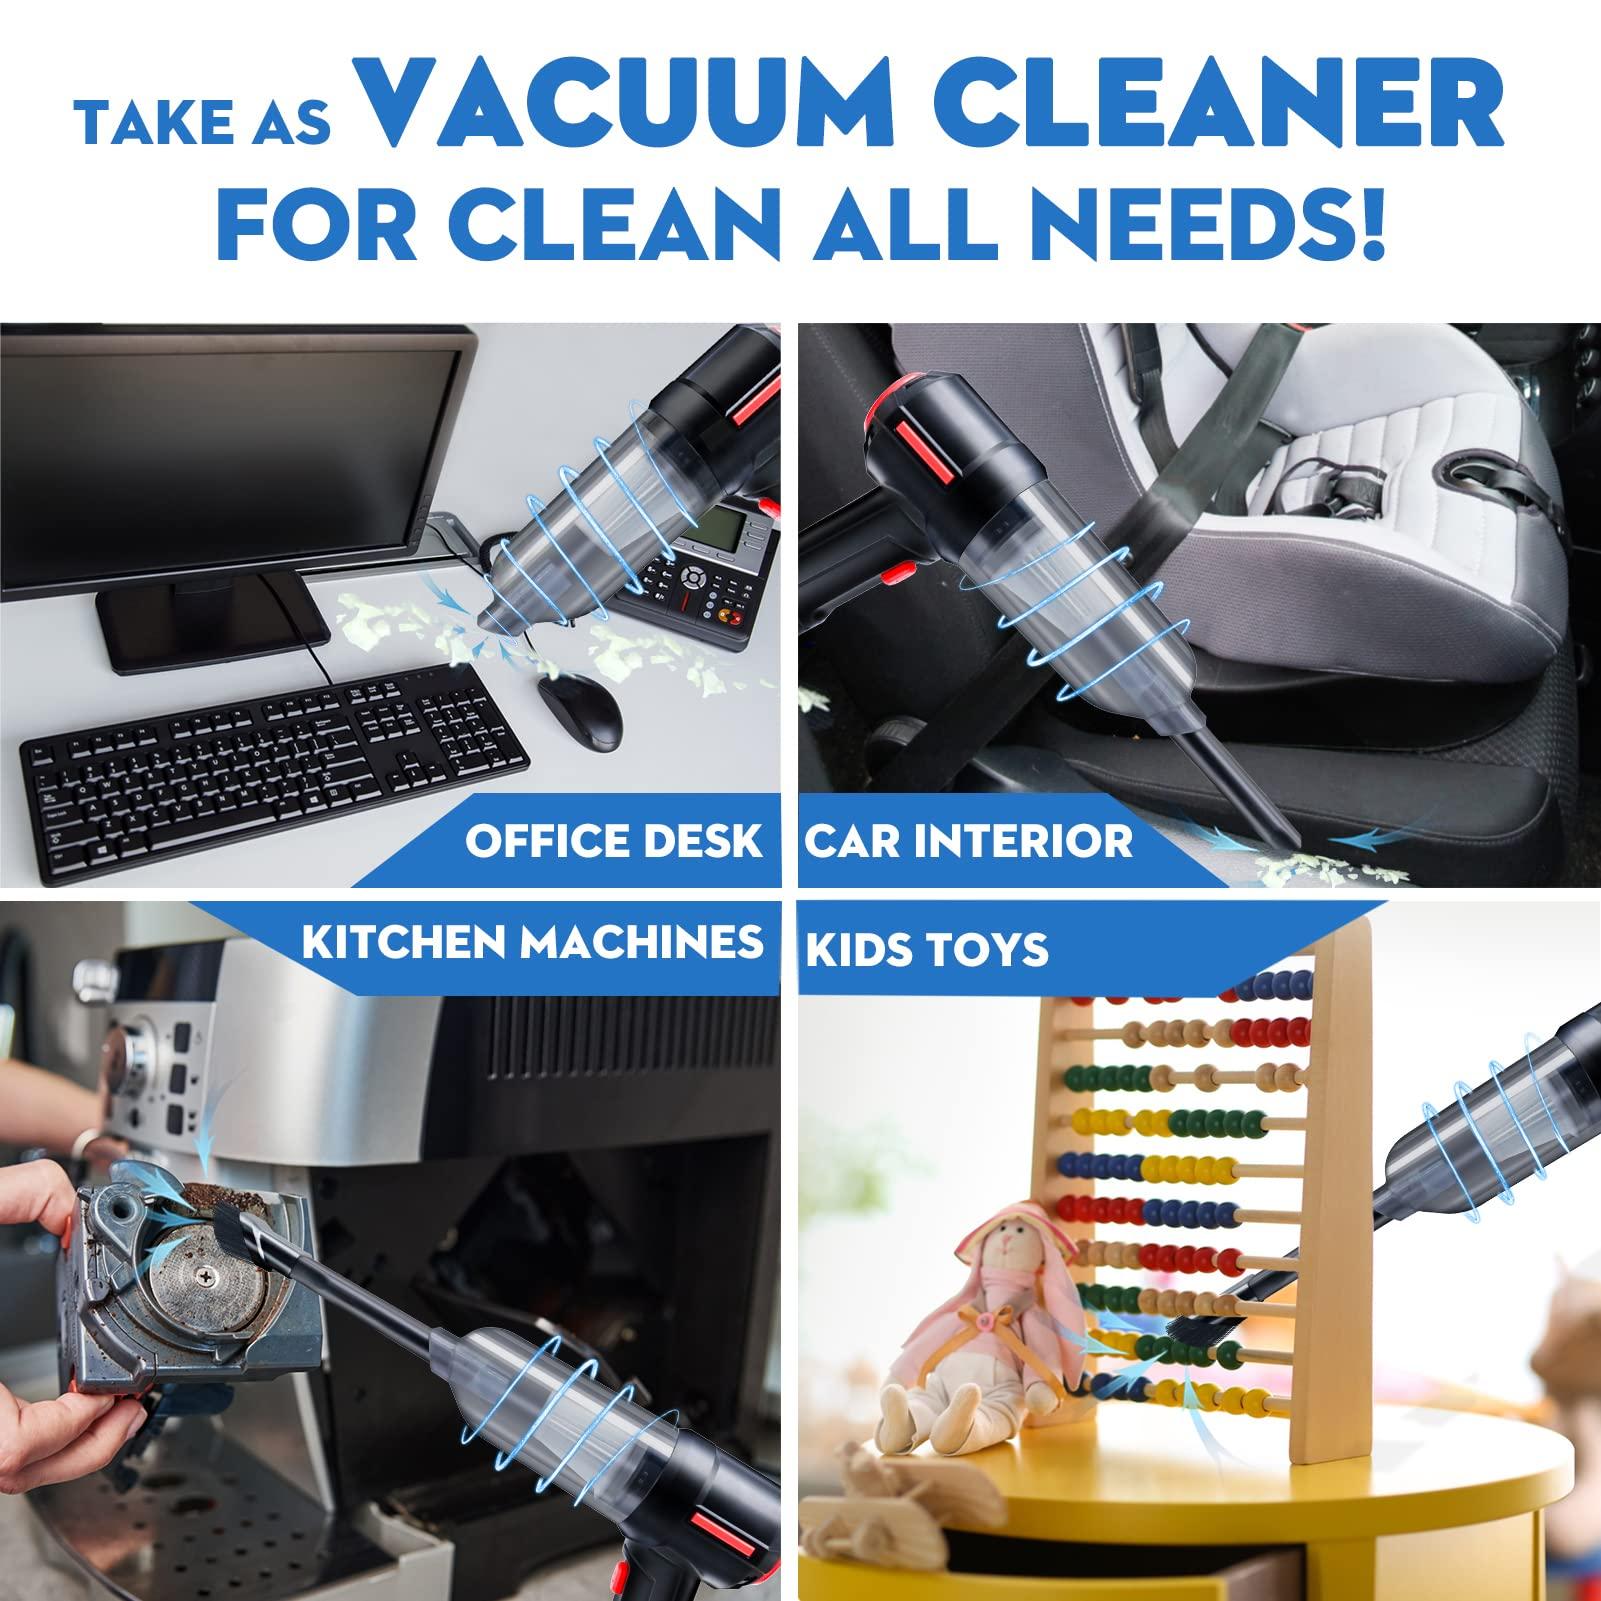 3-in-1 Computer Vacuum Cleaner, Compressed Air Duster Blower, Portable Handheld Cordless Car Hoover, Rechargeable, Mini Keyboard Cleaner Kit, Electric Spray air can for PC, Laptop, Electronics 3